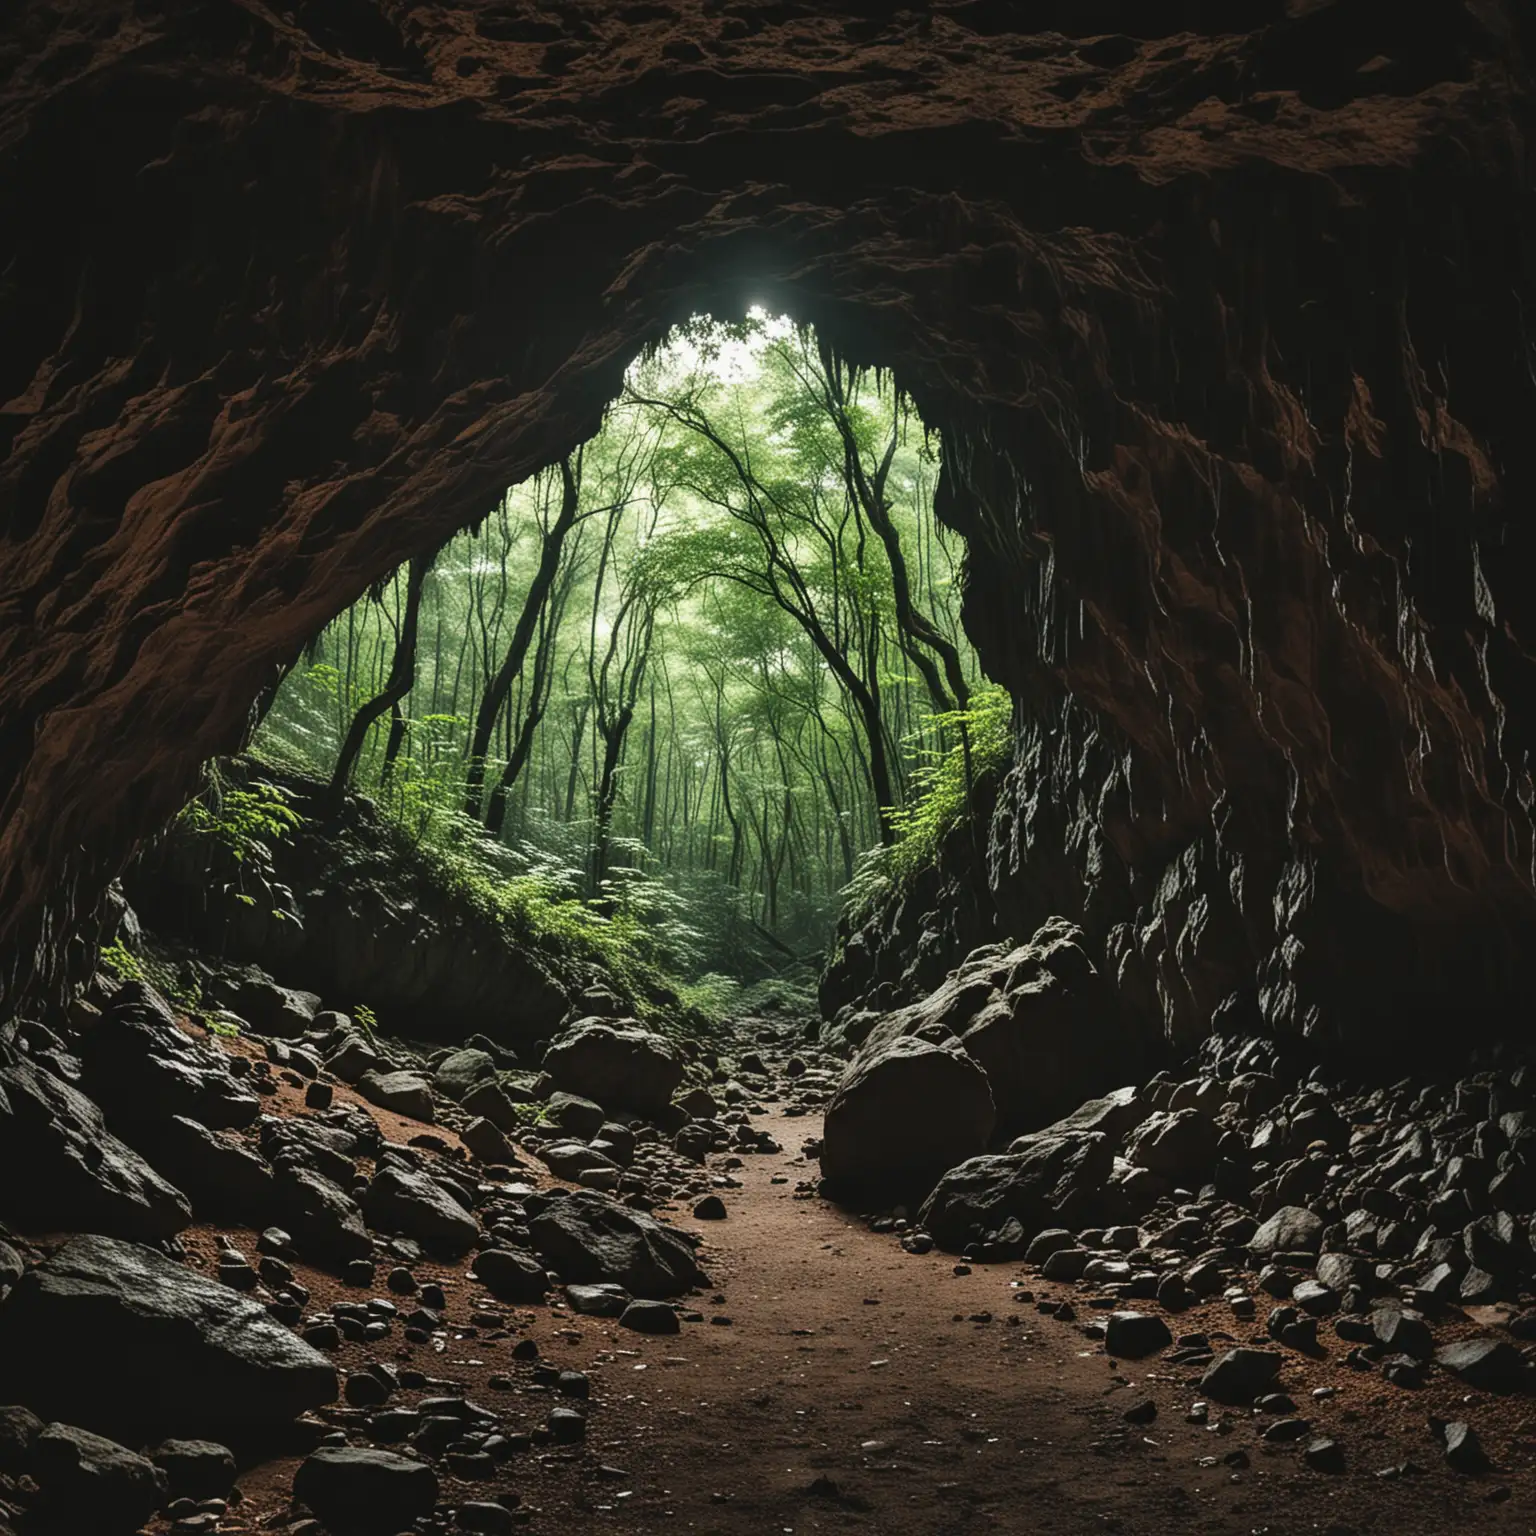 Show me the view of a dense forest as seen from the inside of a dark cave.